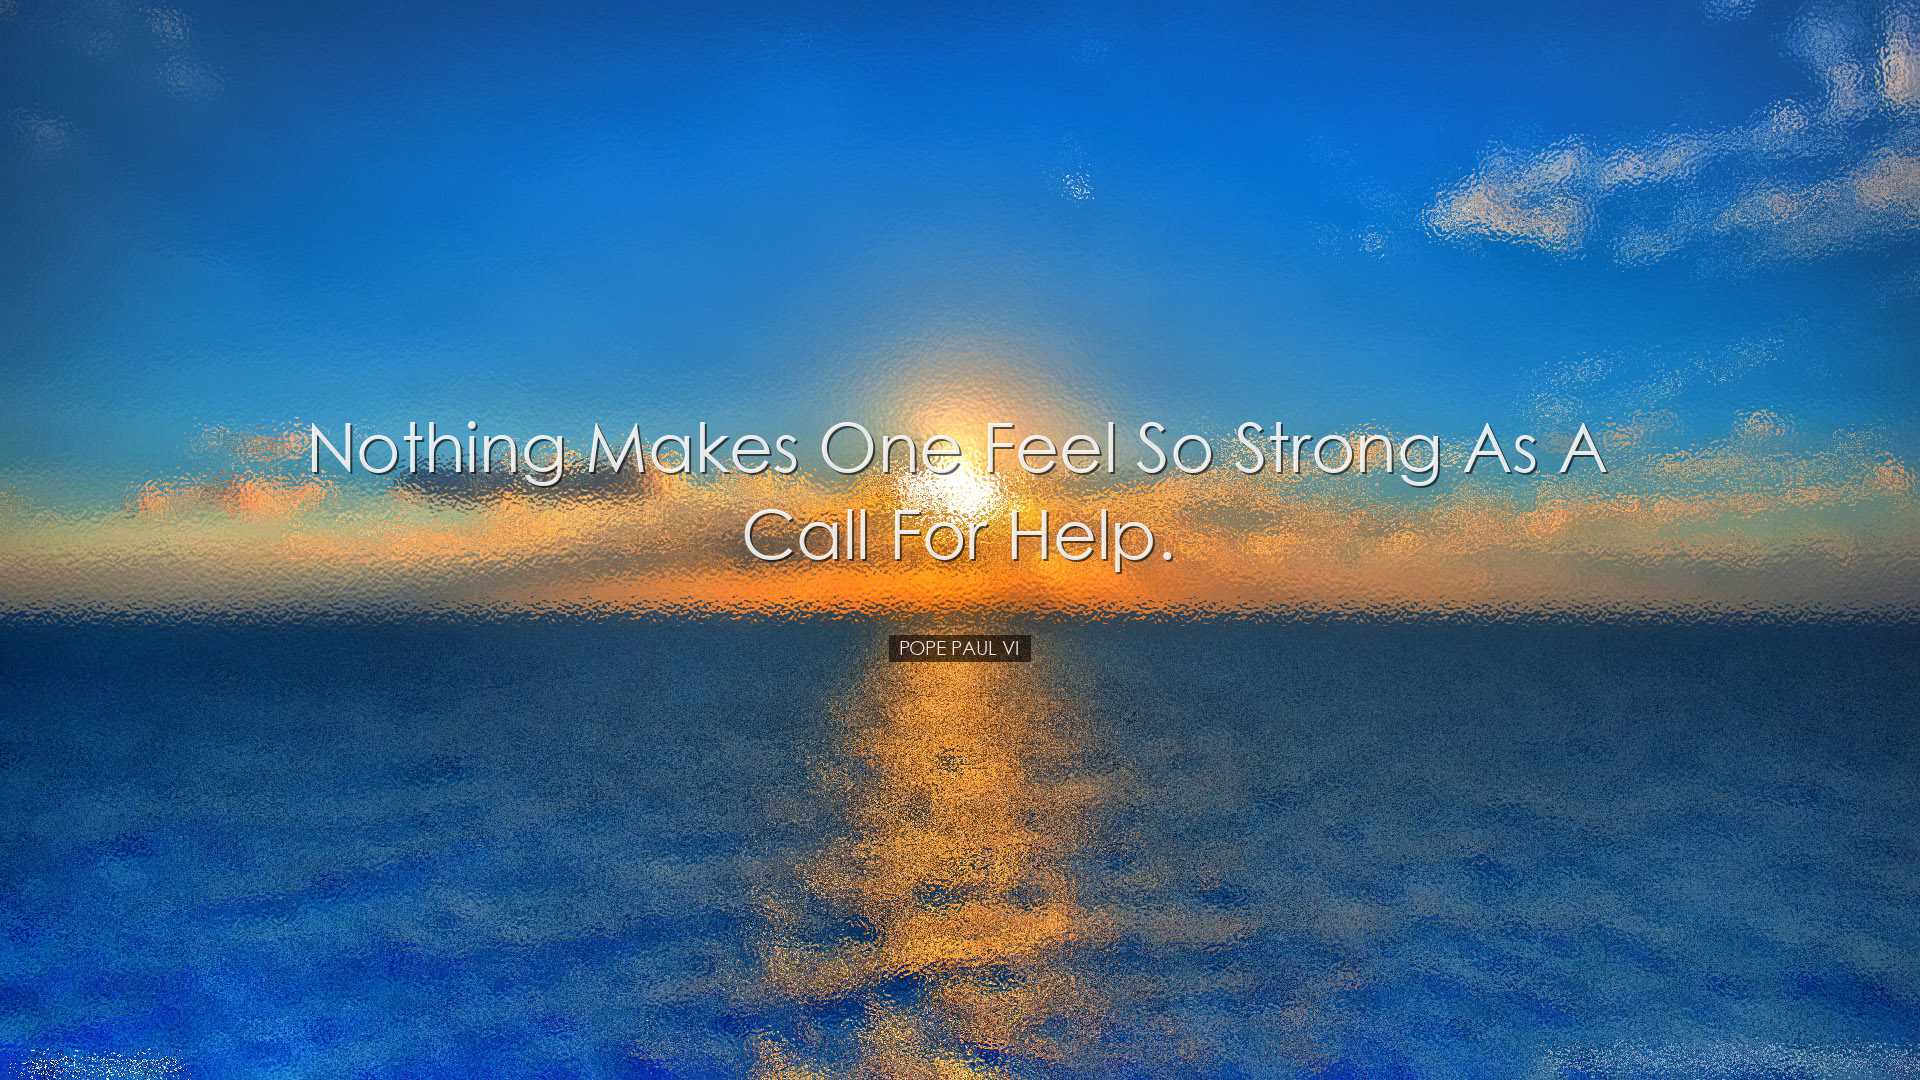 Nothing makes one feel so strong as a call for help. - Pope Paul V